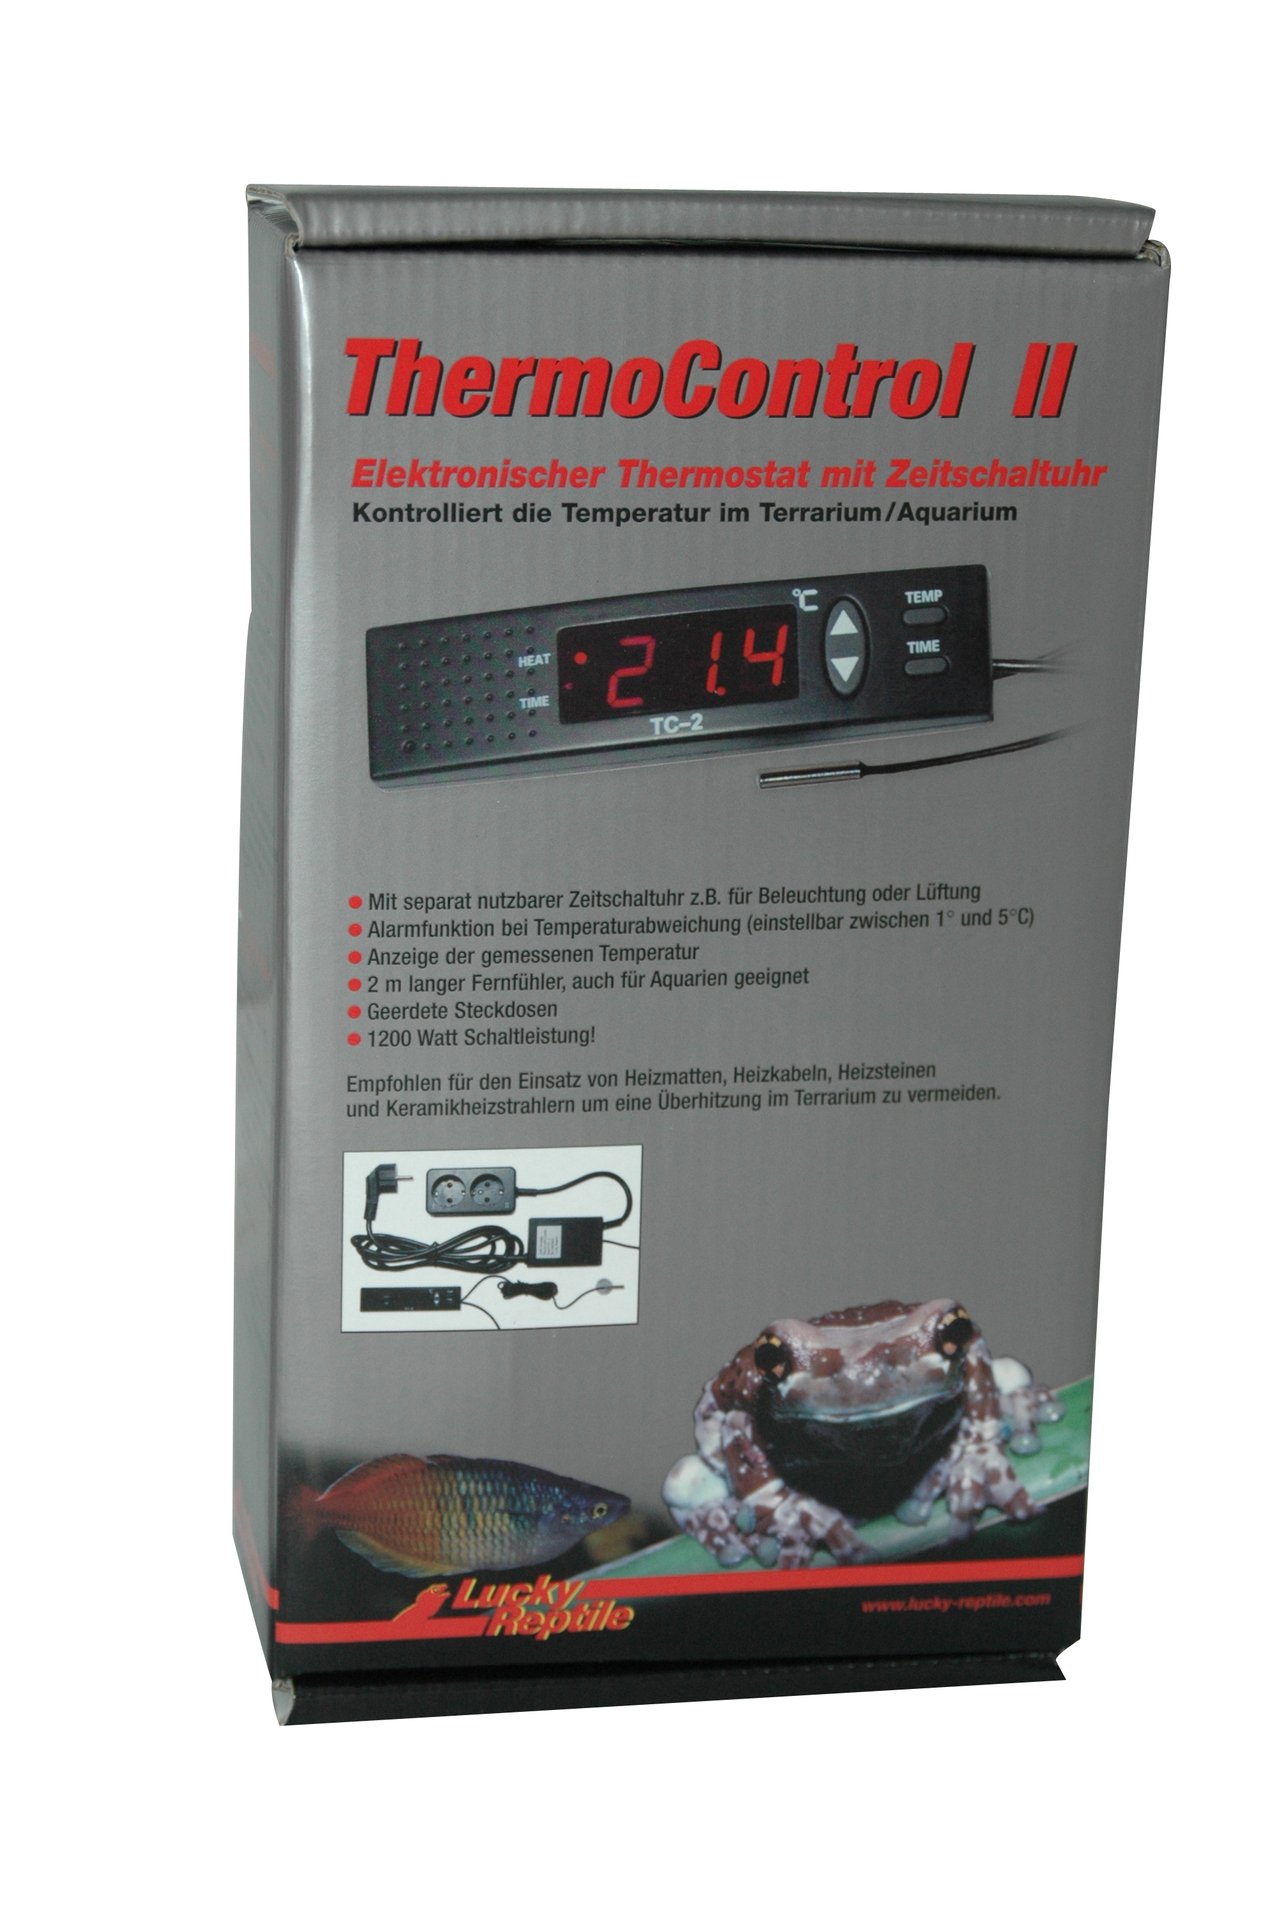 Import-Export Peter Hoch GmbH Thermo Control II